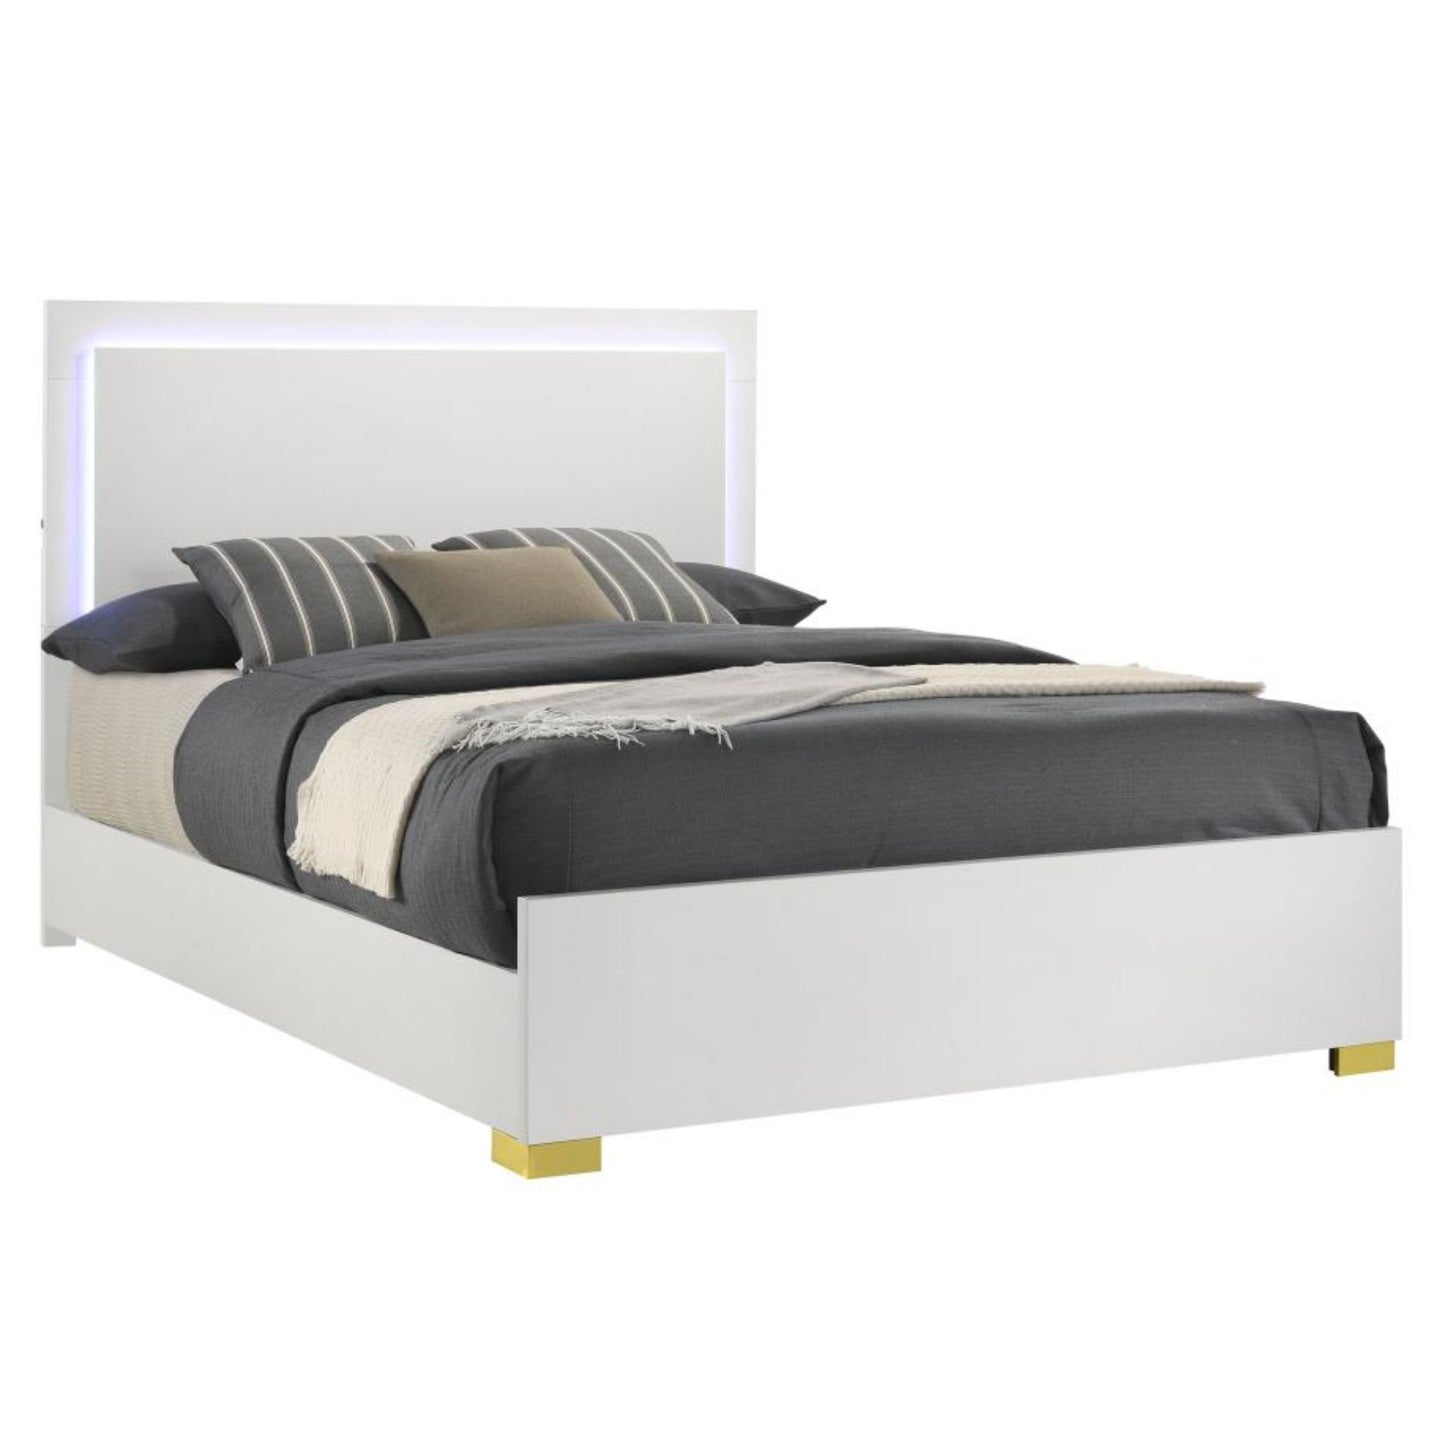 MARCELINE Eastern King Bed with LED Headboard White